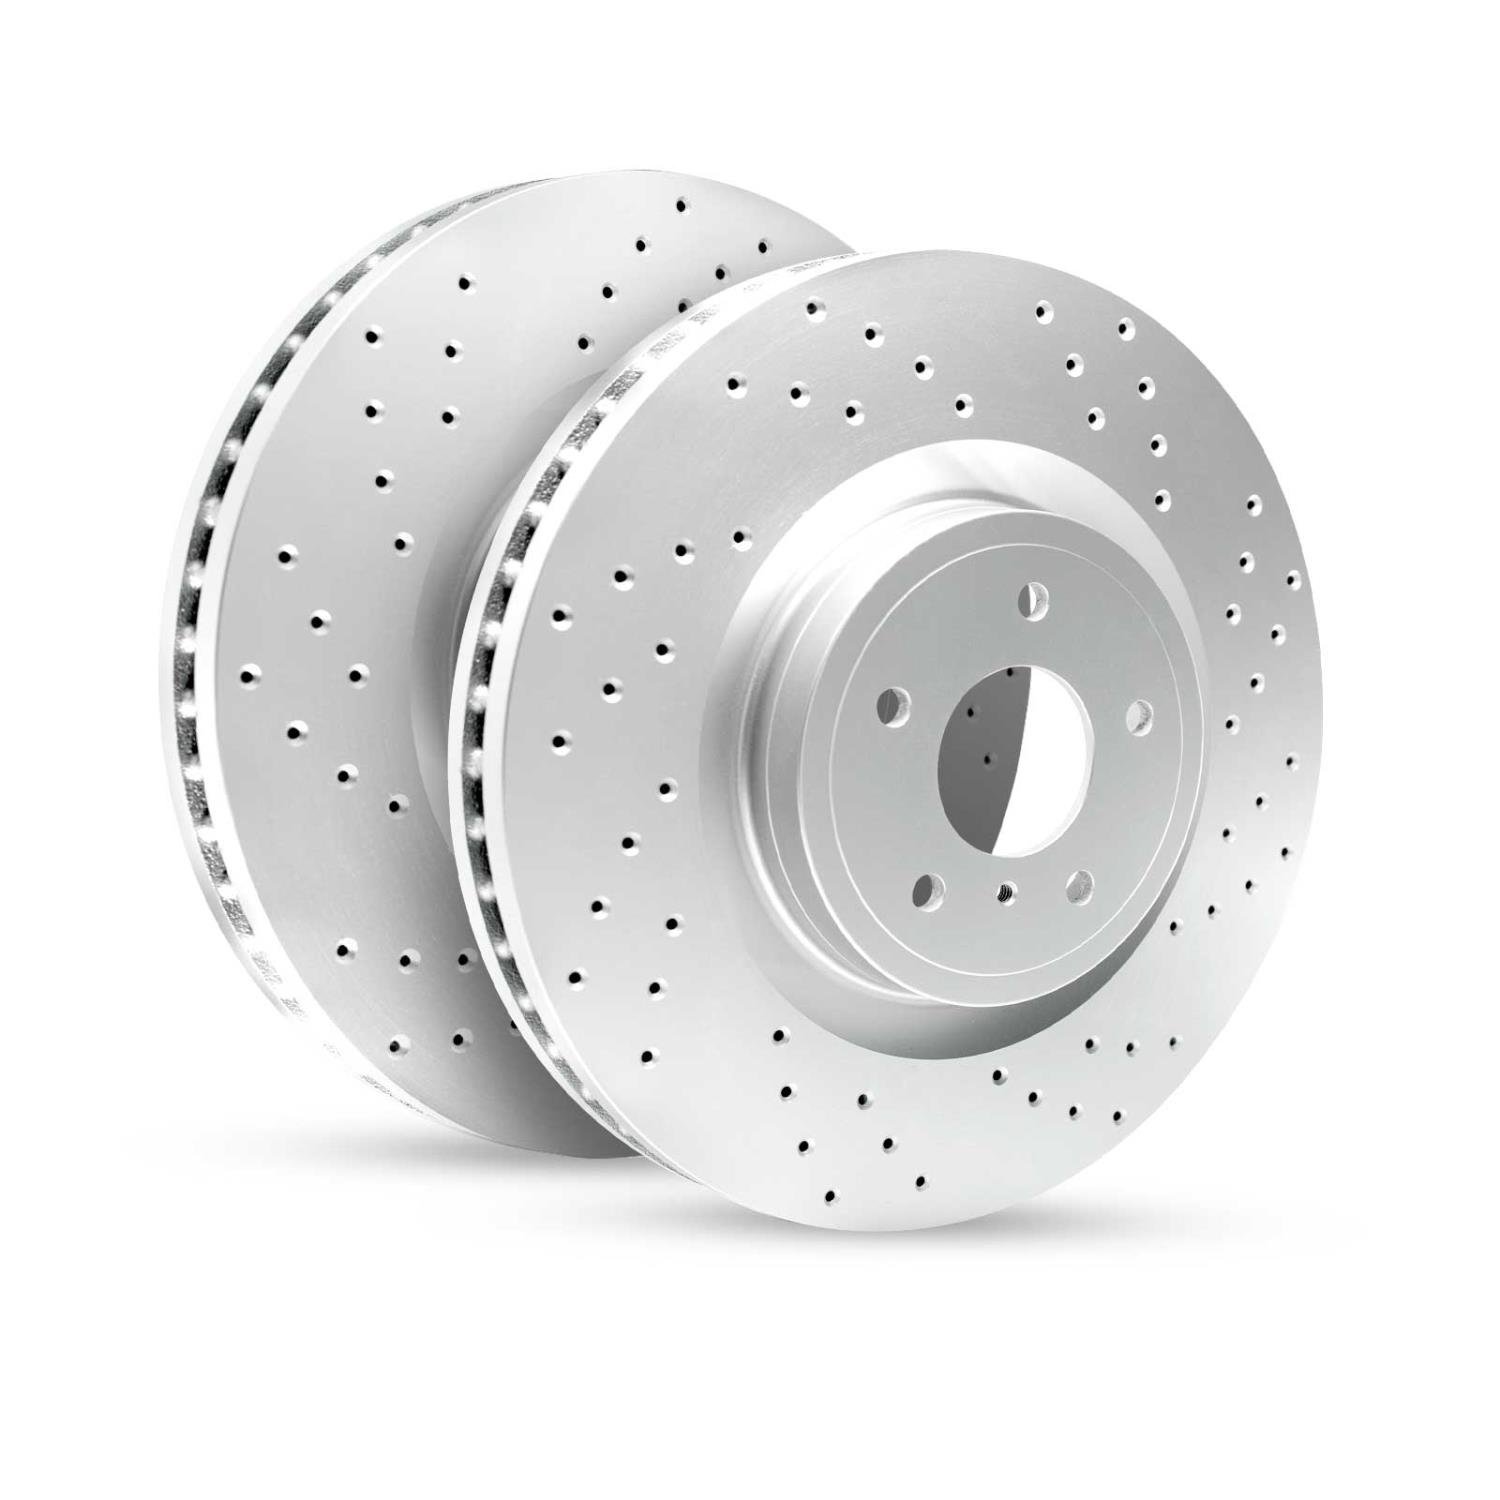 GEO-Carbon Drilled/Slotted Rotors, 2010-2015 Acura/Honda, Position: Rear